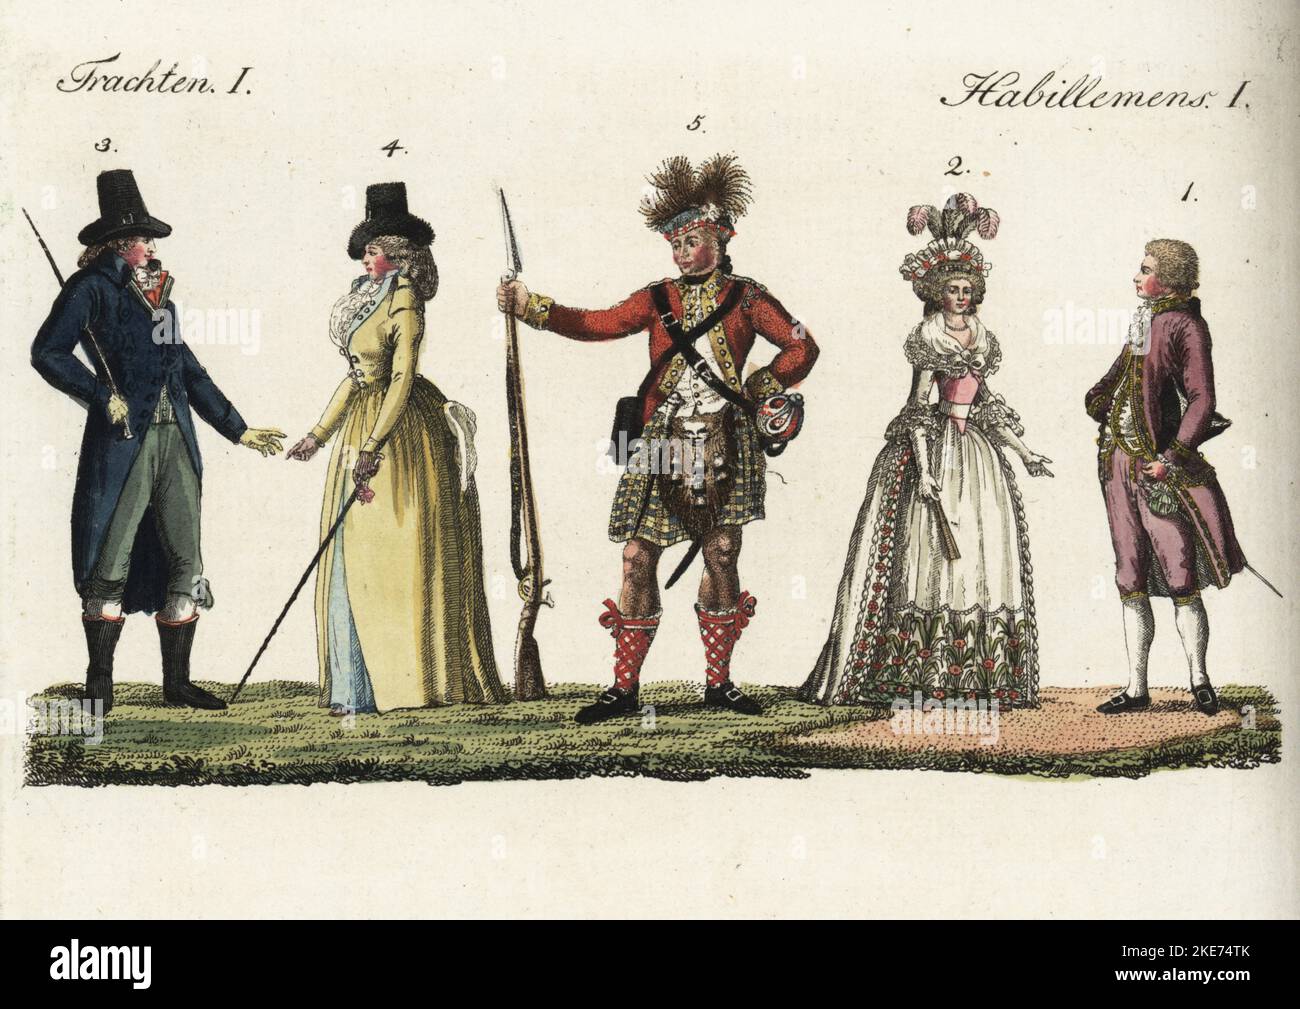 Costumes of European people, 18th century. French gentleman and woman in high fashion 1,2, Englishman and woman in casual clothes, top hats and riding coats 3,4, Scottish highlander in military wear, red coat, tartan kilt, sealskin sporran and plumed hat, armed with musket and claymore 5. Handcoloured copperplate engraving from Friedrich Johann Bertuch's Bilderbuch fur Kinder (Picture Book for Children), Weimar, 1792. Stock Photo